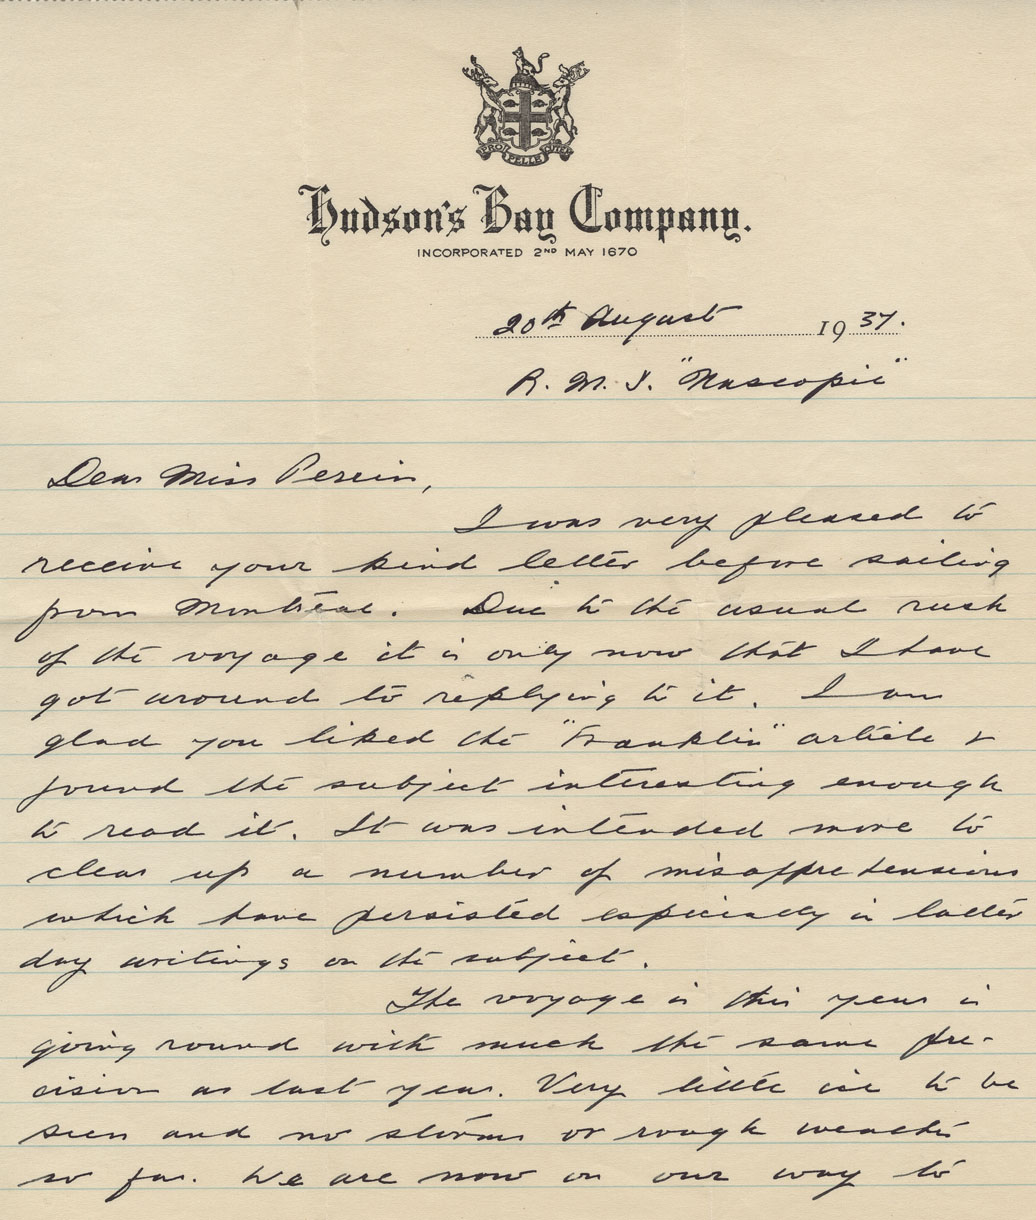 Letter from William Gibson, Assistant District Manager, 20 August, 1937.